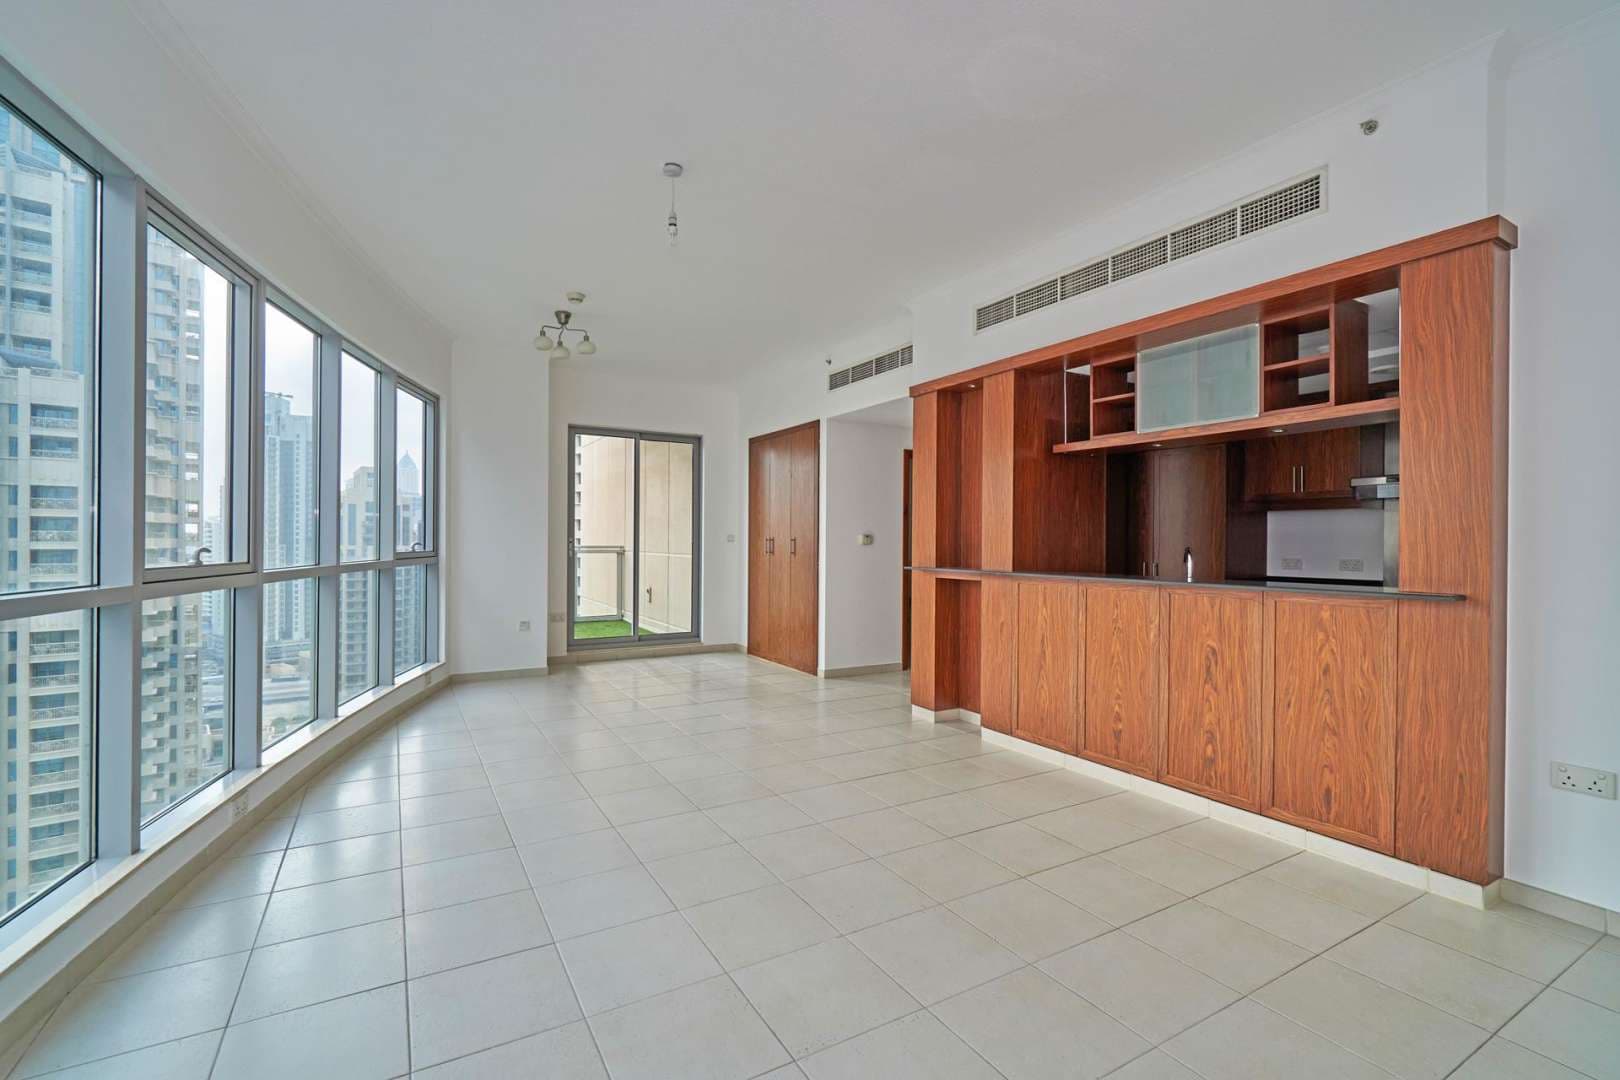 1 Bedroom Apartment For Rent The Residences Downtown Dubai Lp05310 2a9b310468f45600.jpg